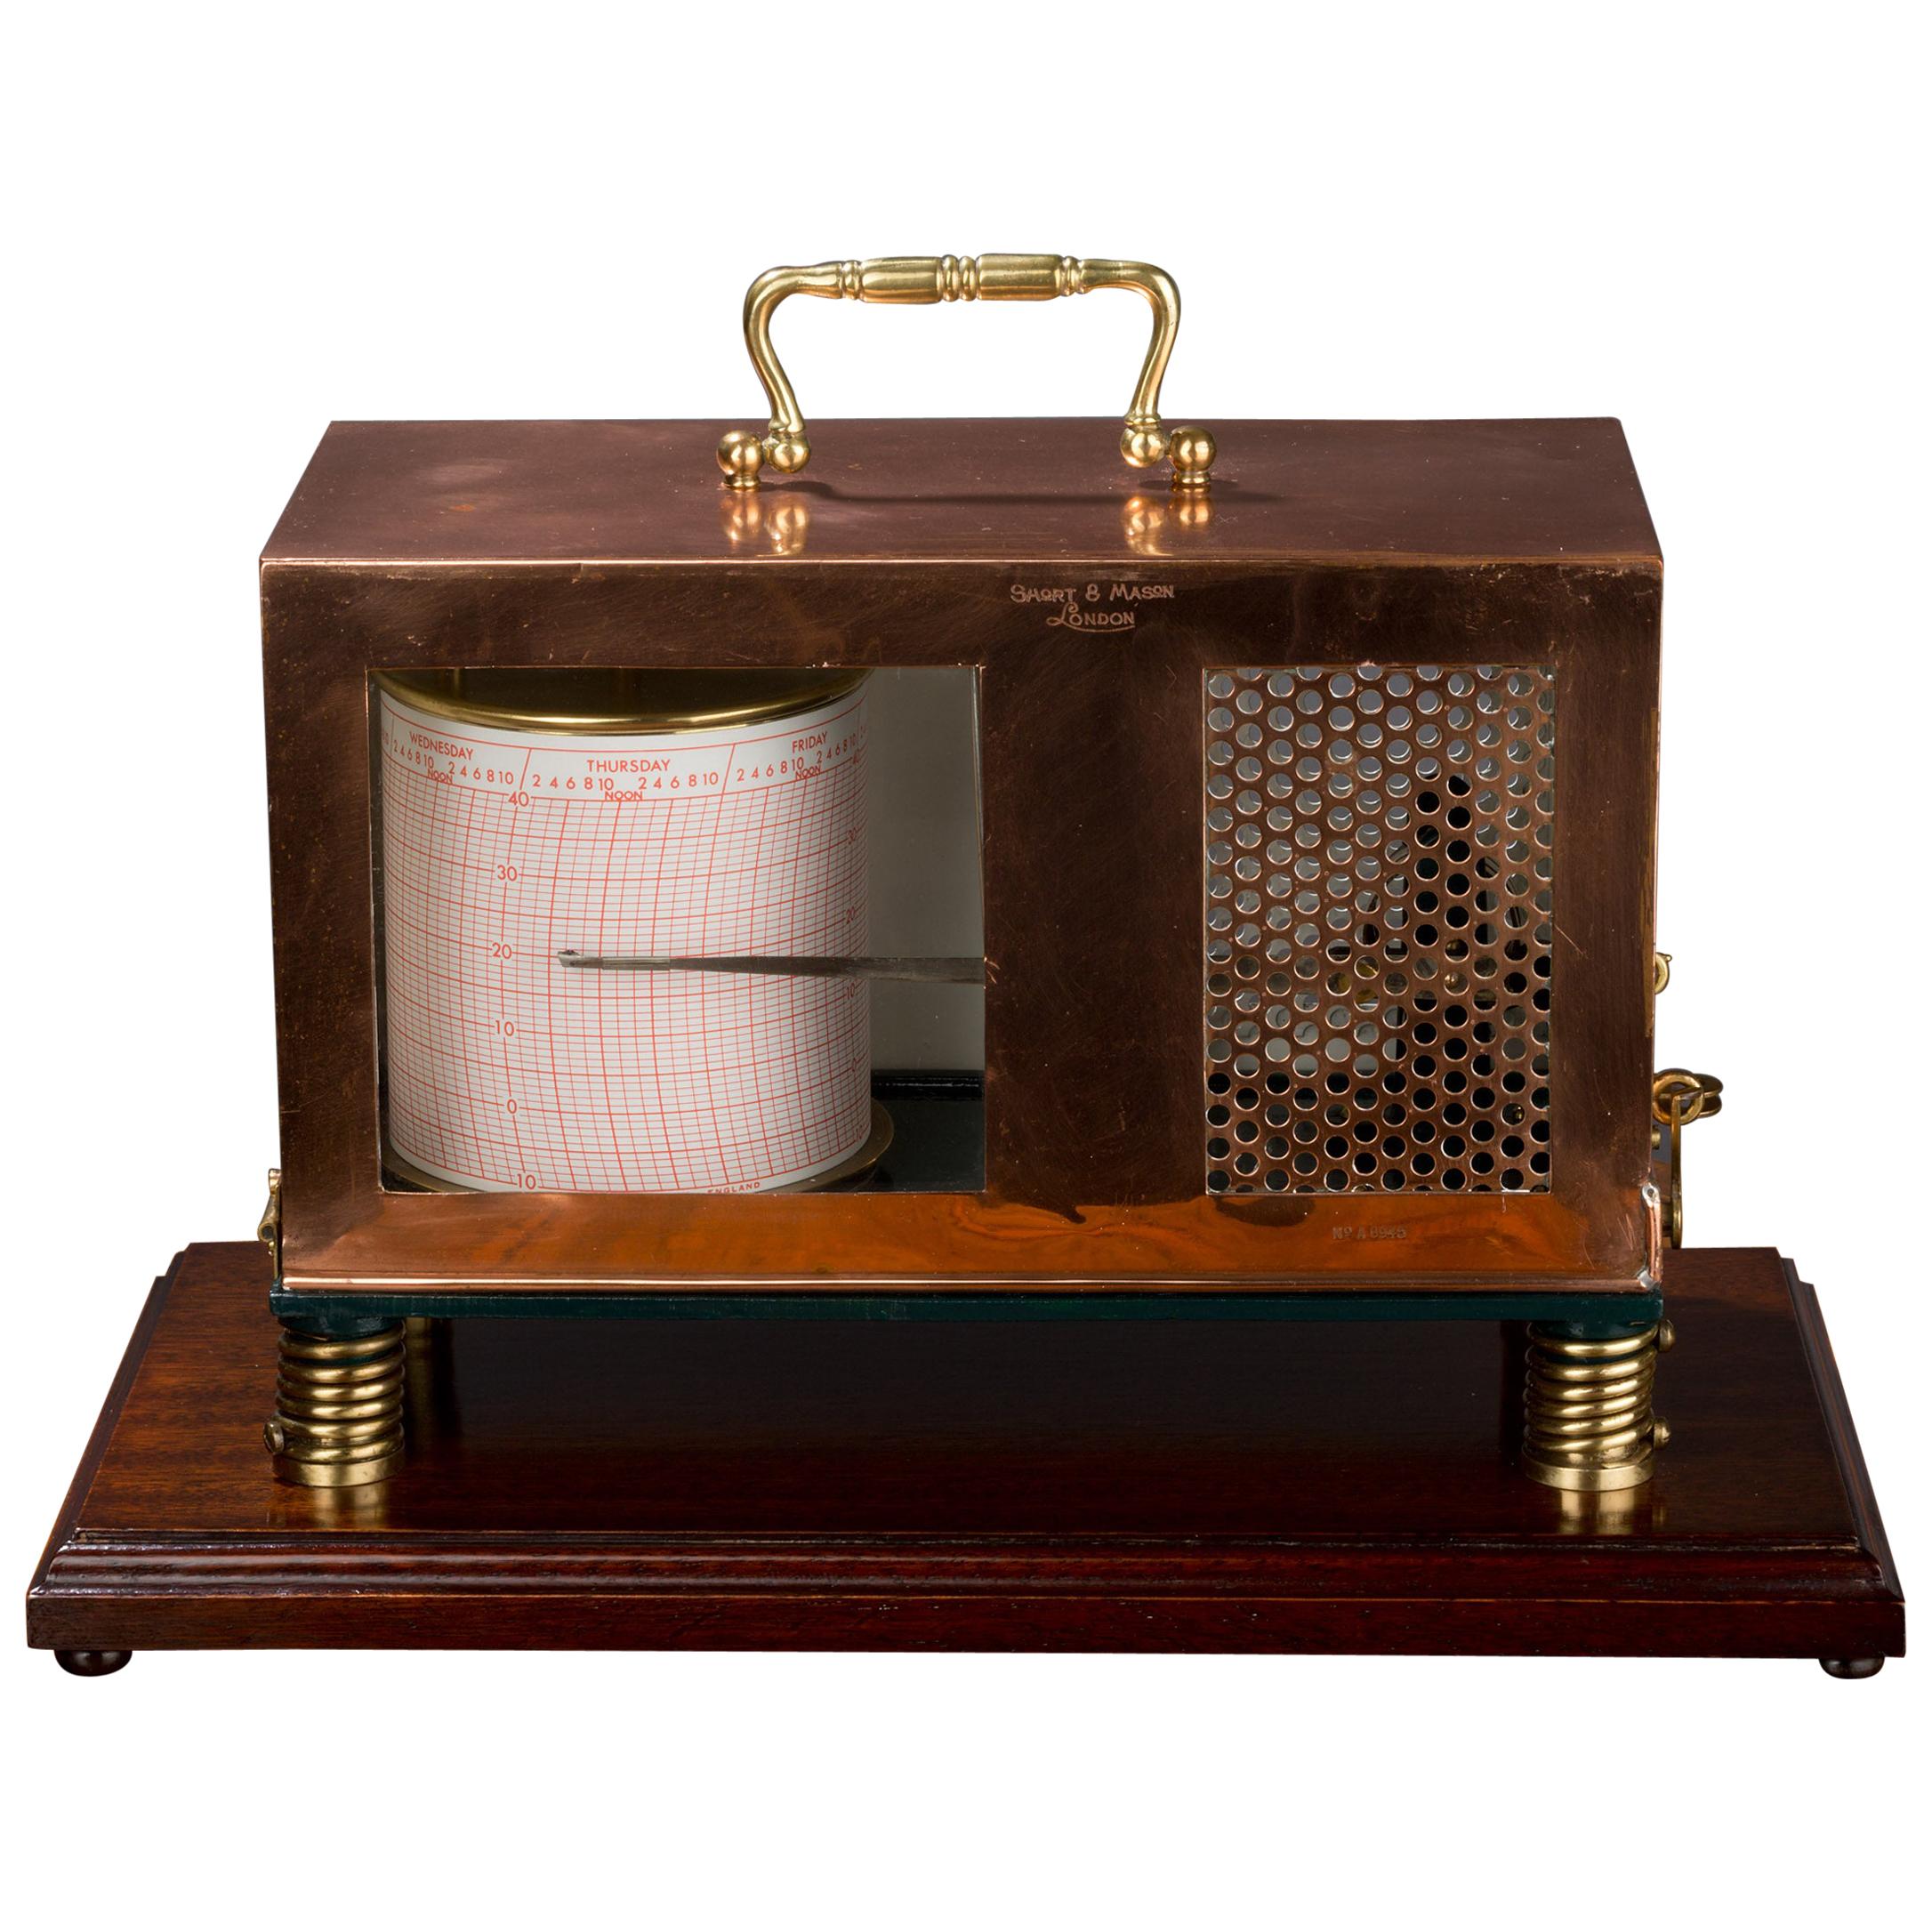 Edwardian Marine Copper Thermograph by Short and Mason, London